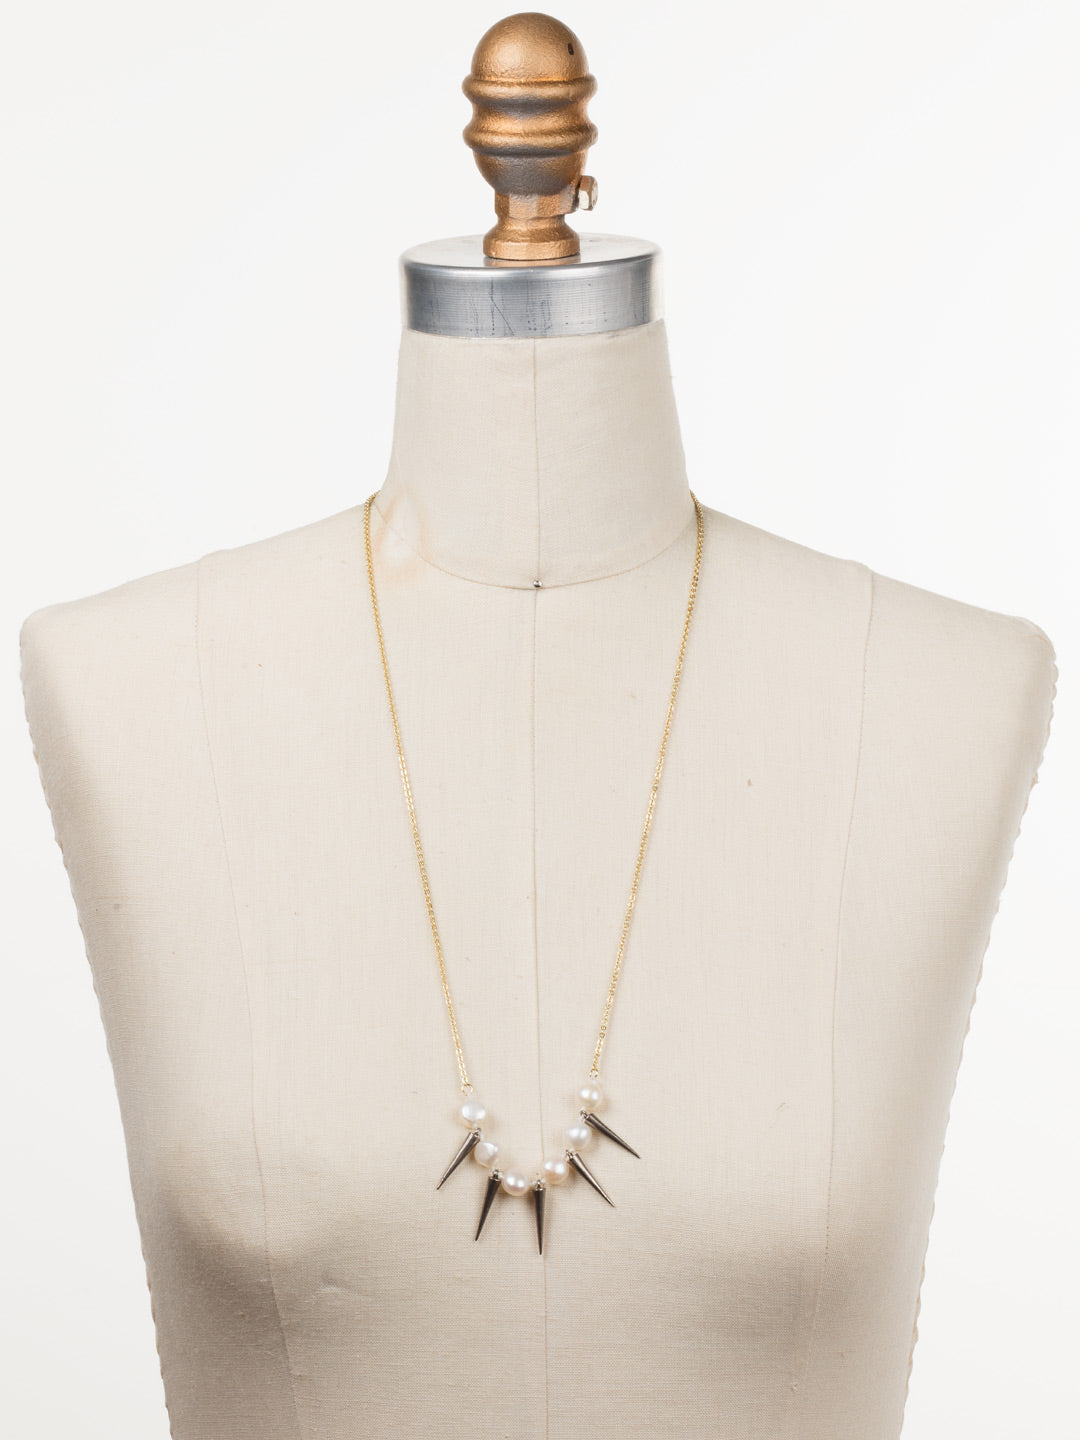 Hera Classic Necklace Tennis Necklace